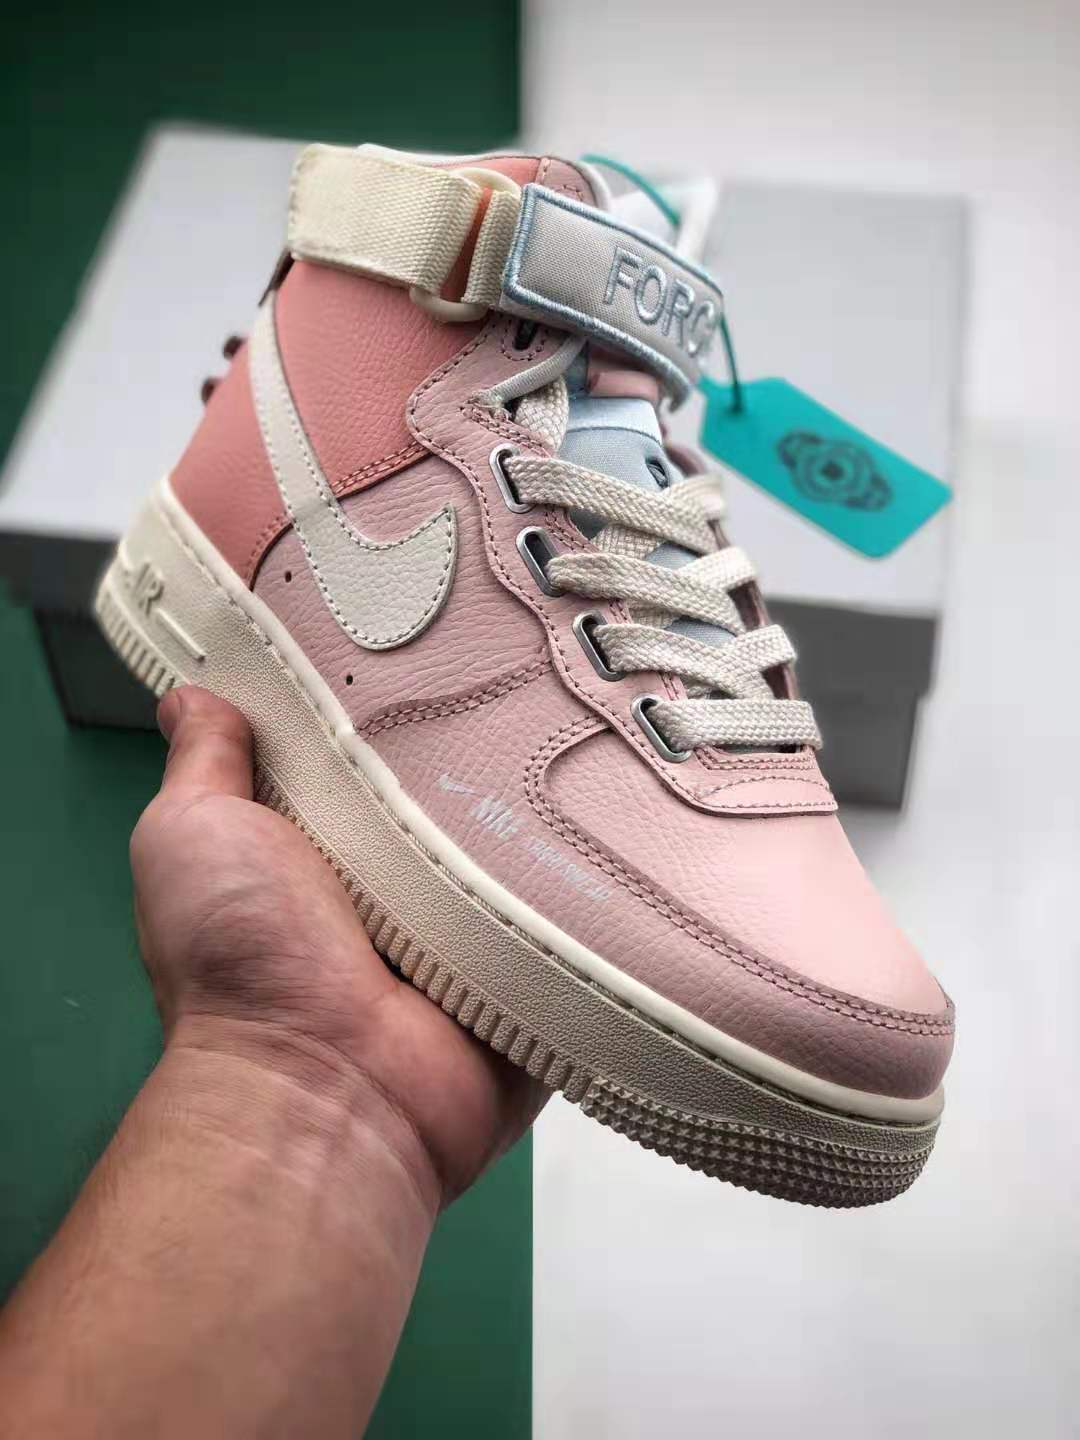 Nike Air Force 1 High Utility 'Force is Female' CQ4810-621 - Stylish and Powerful Women's Sneakers